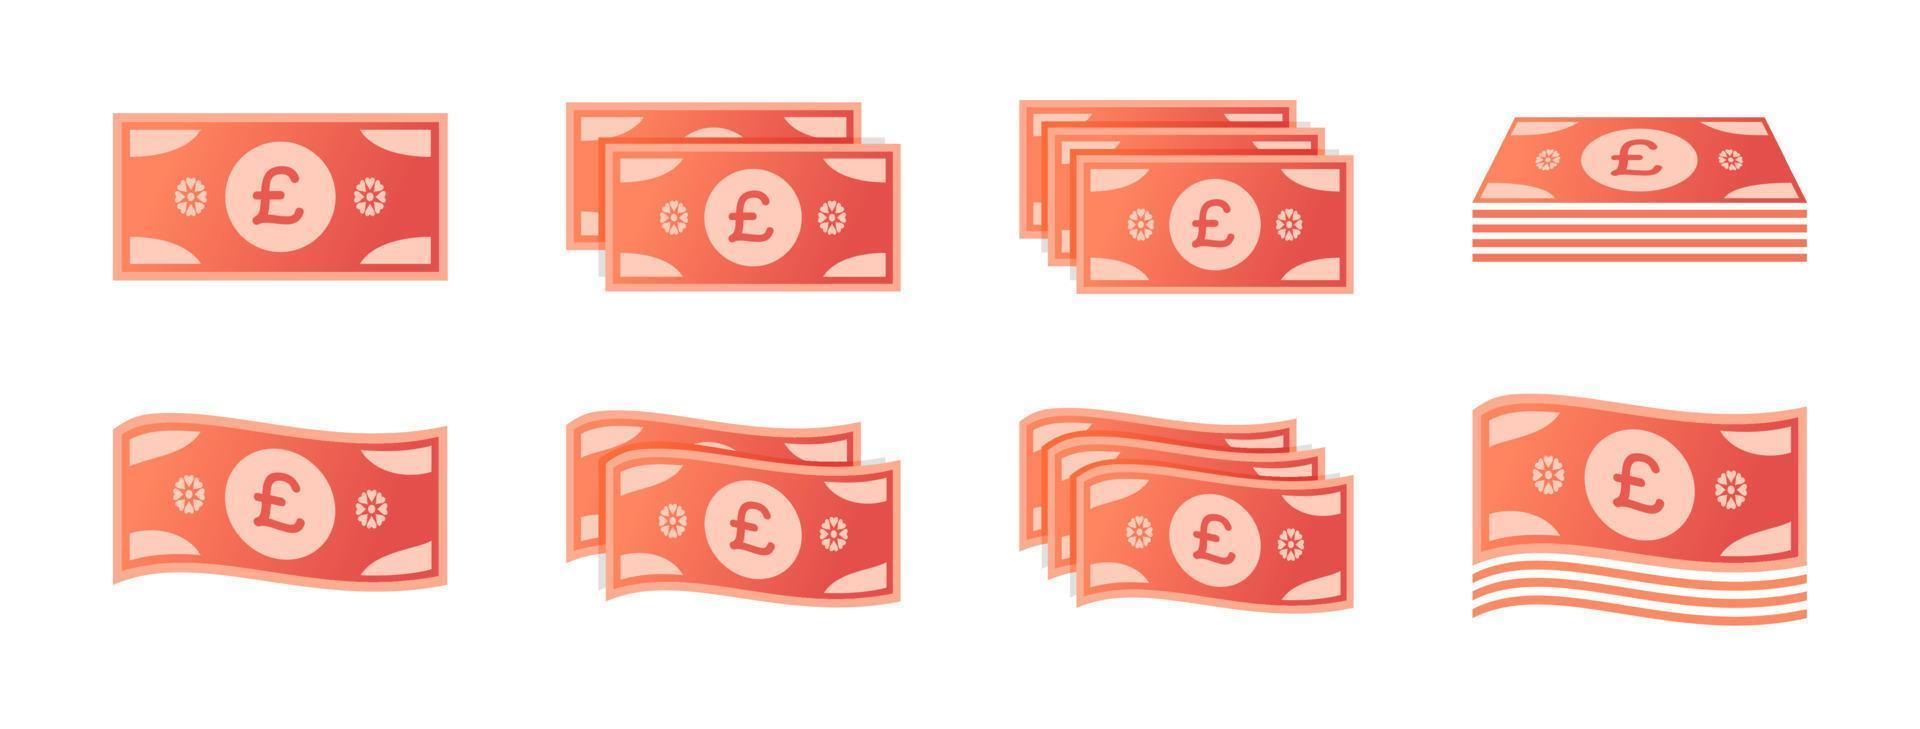 Pound Sterling Banknote Icon Set vector